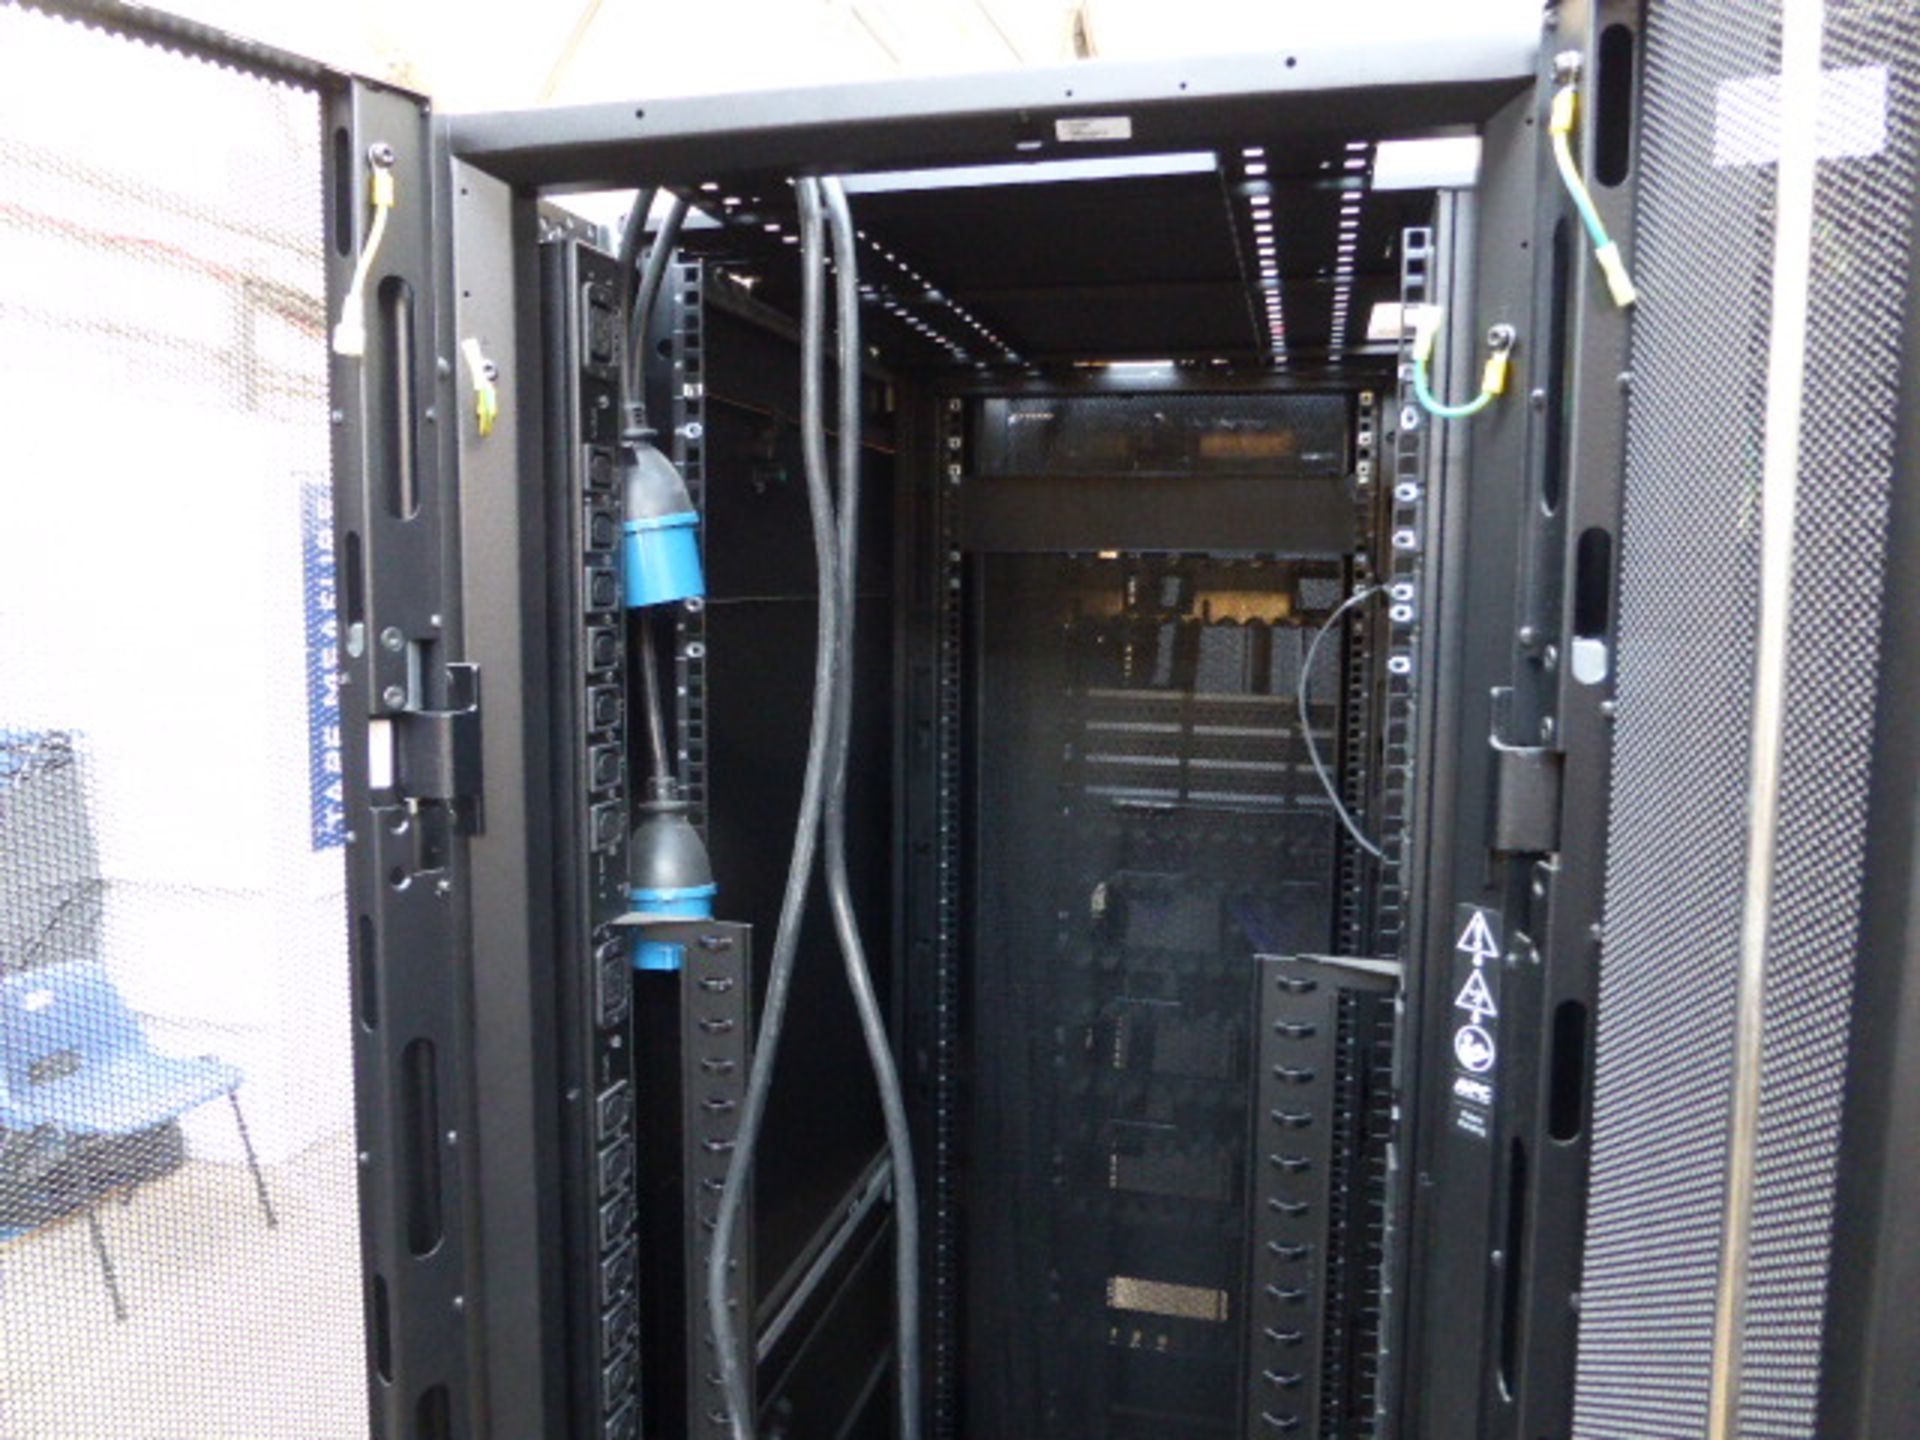 APC server cabinet on castors 60cm wide with 2 APC switch rack PDU units each with 24 outputs on - Image 3 of 3